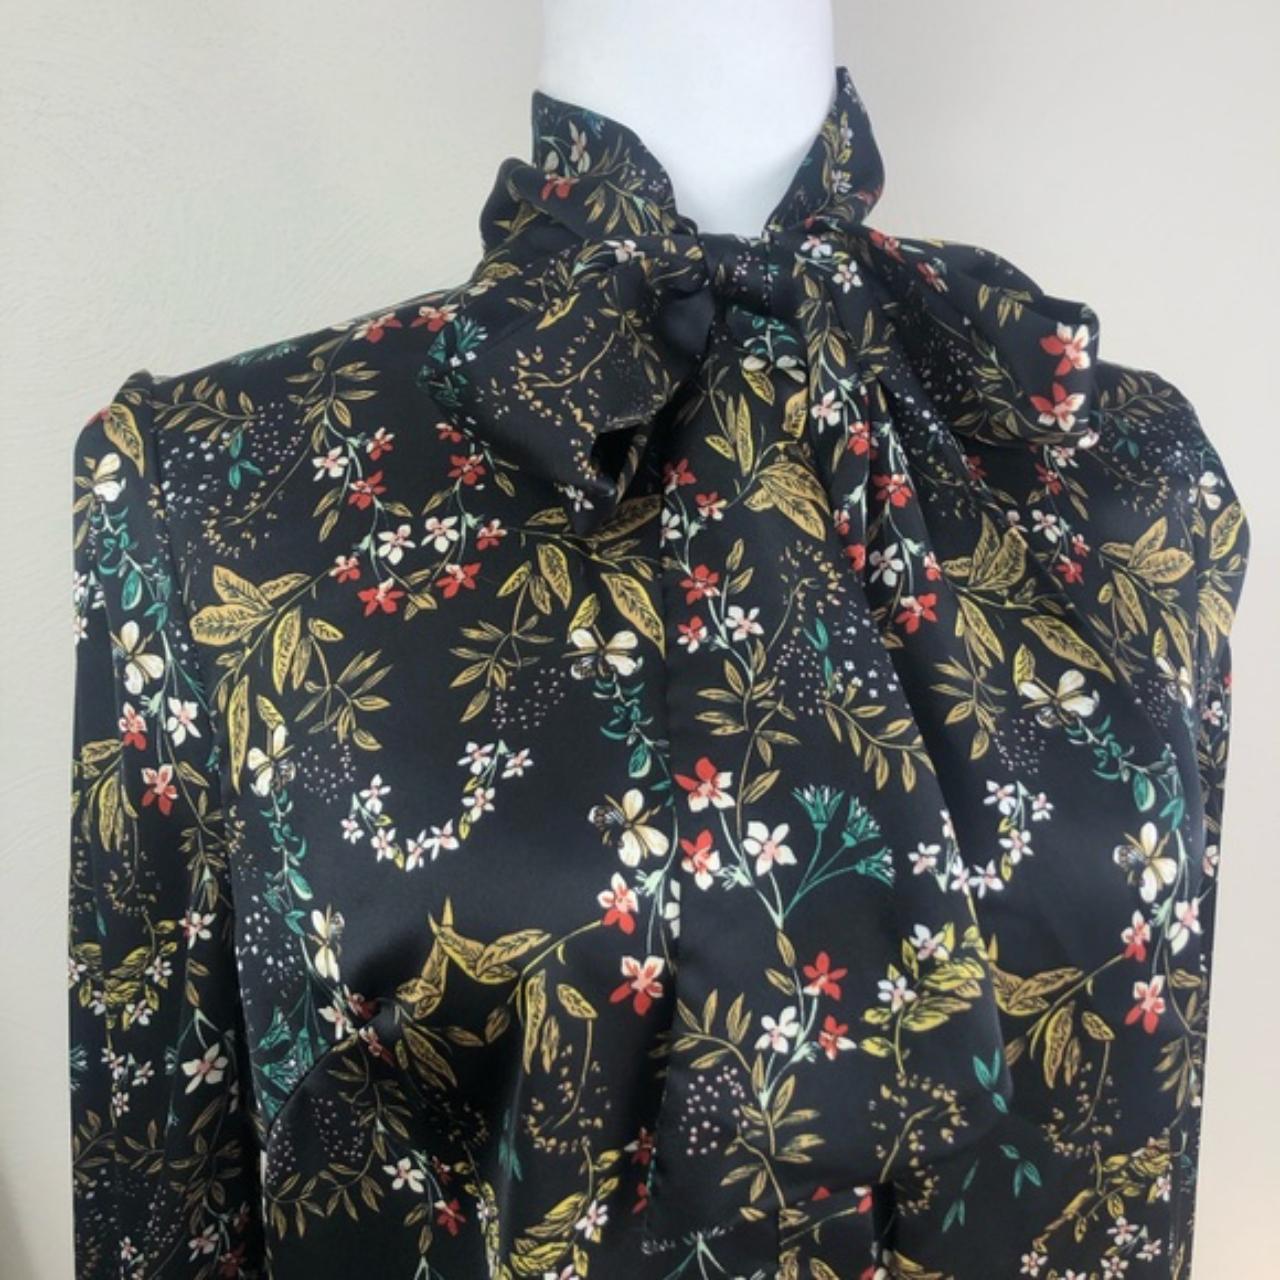 Excellent condition black floral pattern with tiered... - Depop